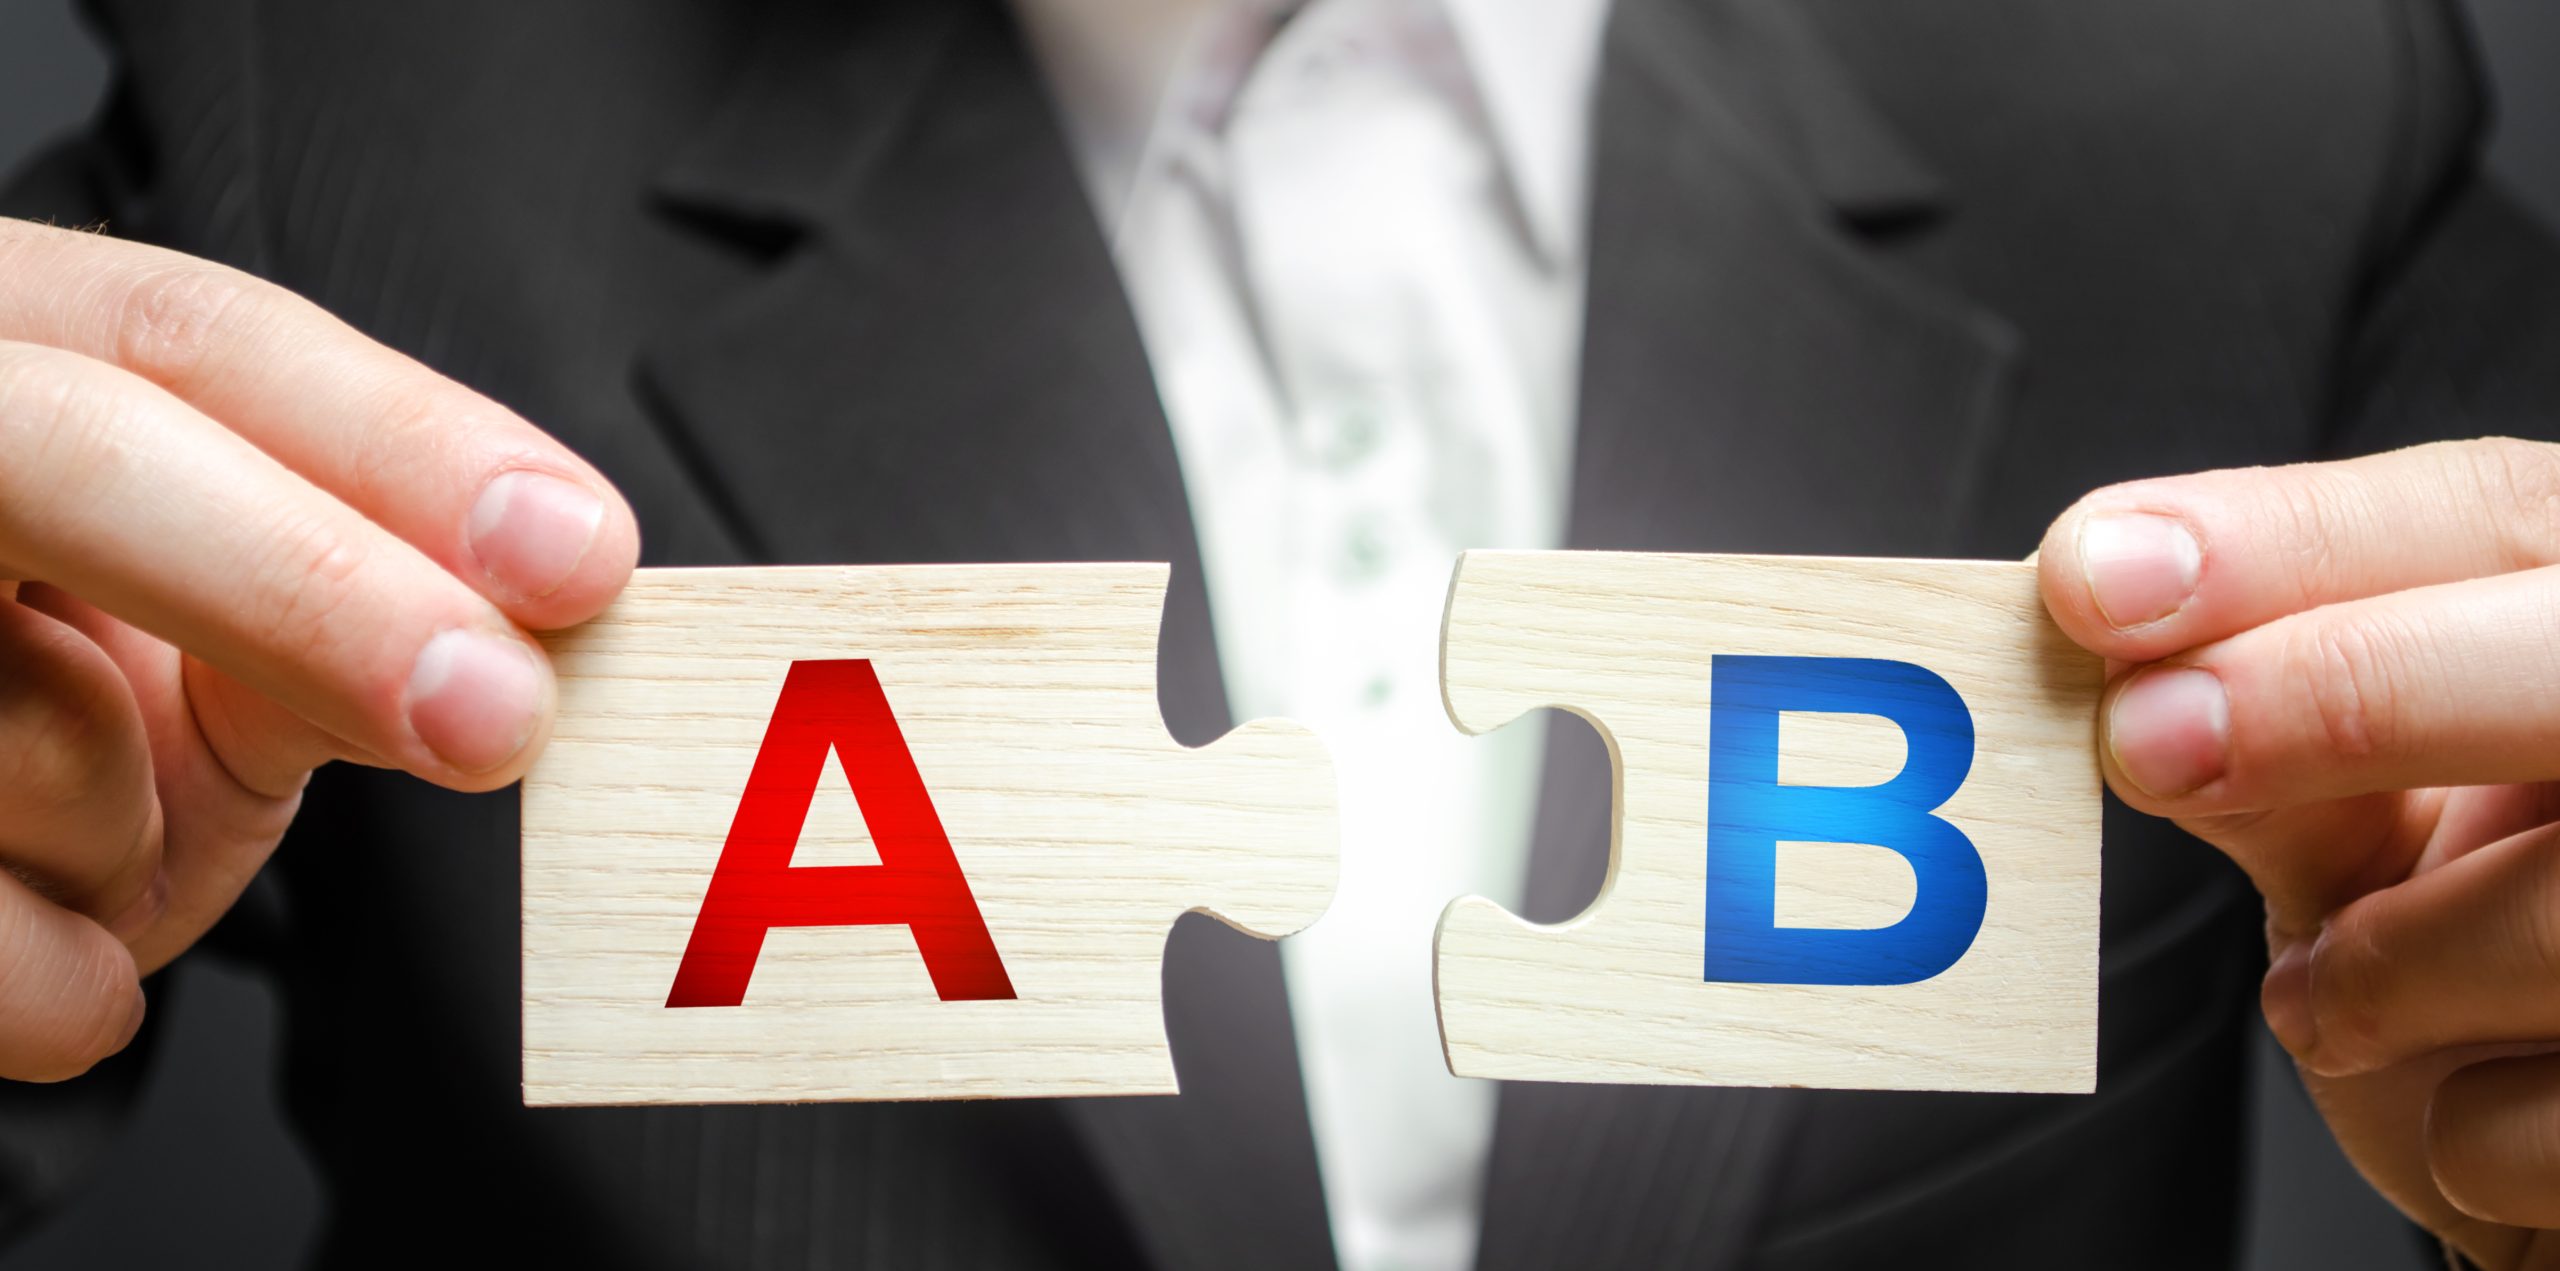 a/b testing in email marketing